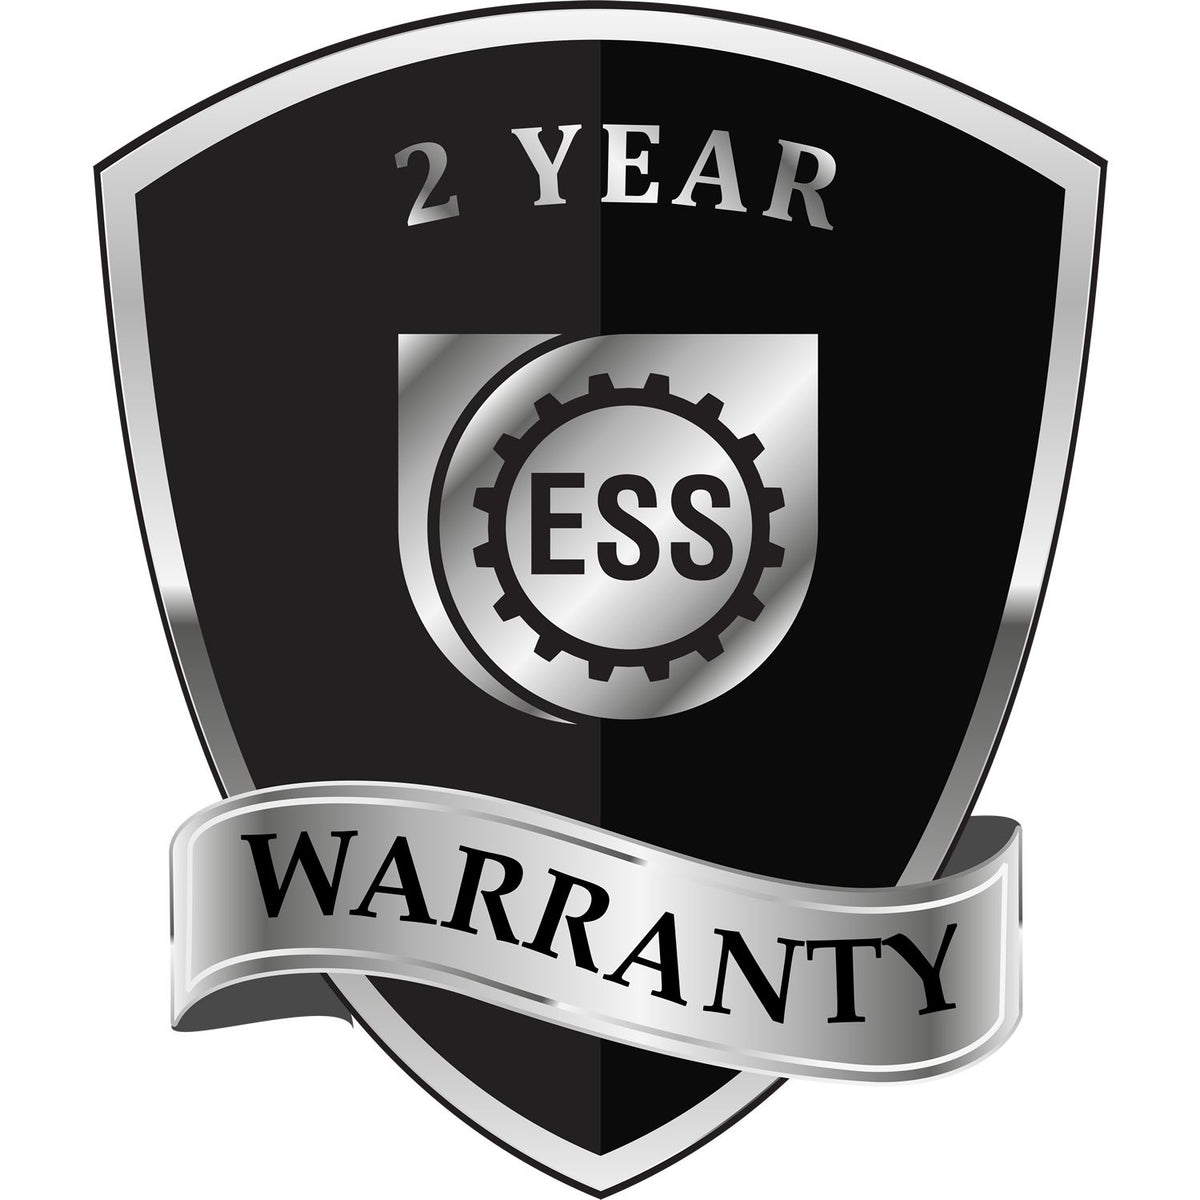 A black and silver badge or emblem showing warranty information for the Idaho Geologist Desk Seal